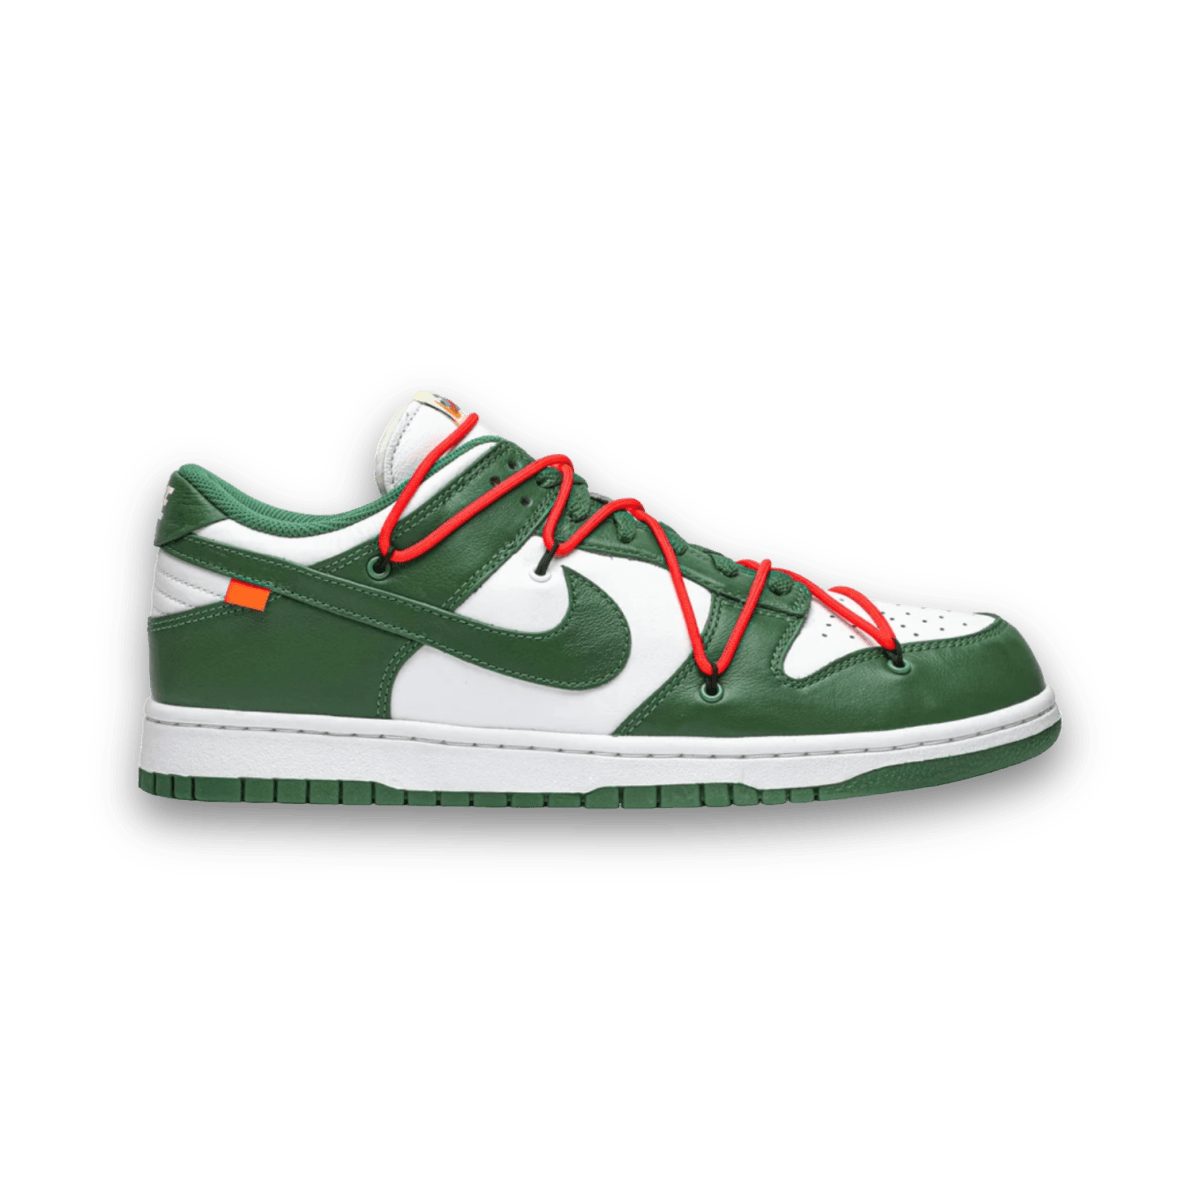 Off-White x Dunk Low Pine Green - Low Sneaker - Dunks - Jawns on Fire - sneakers